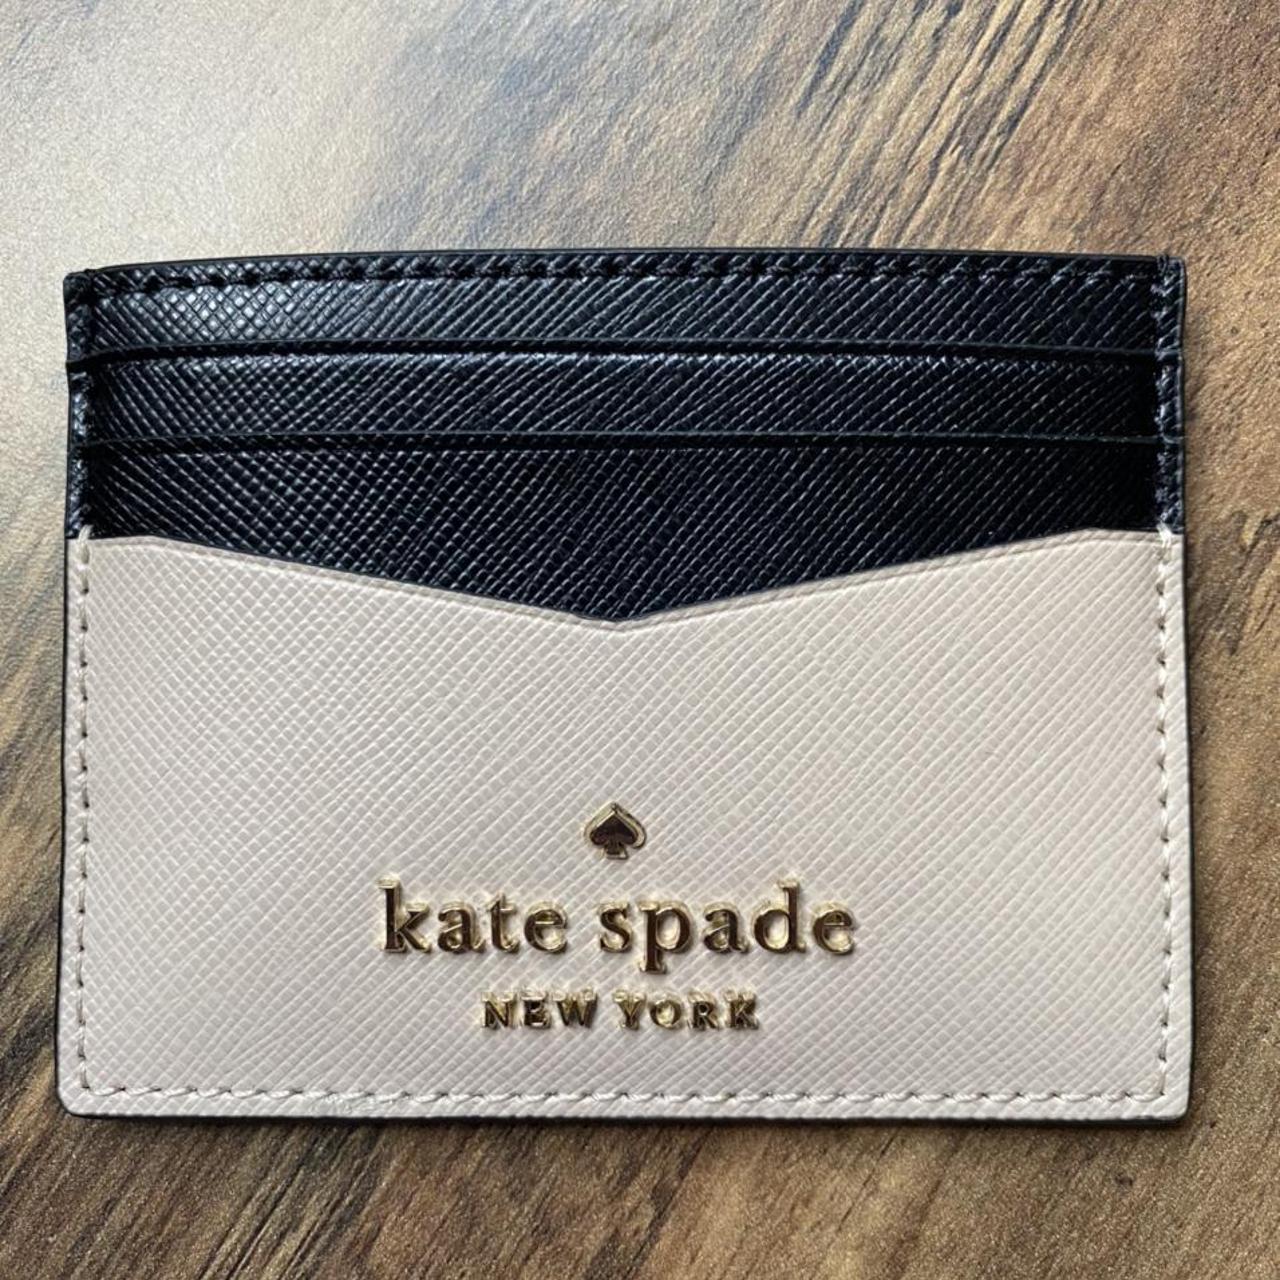 Product Image 2 - Kate spade card holder with